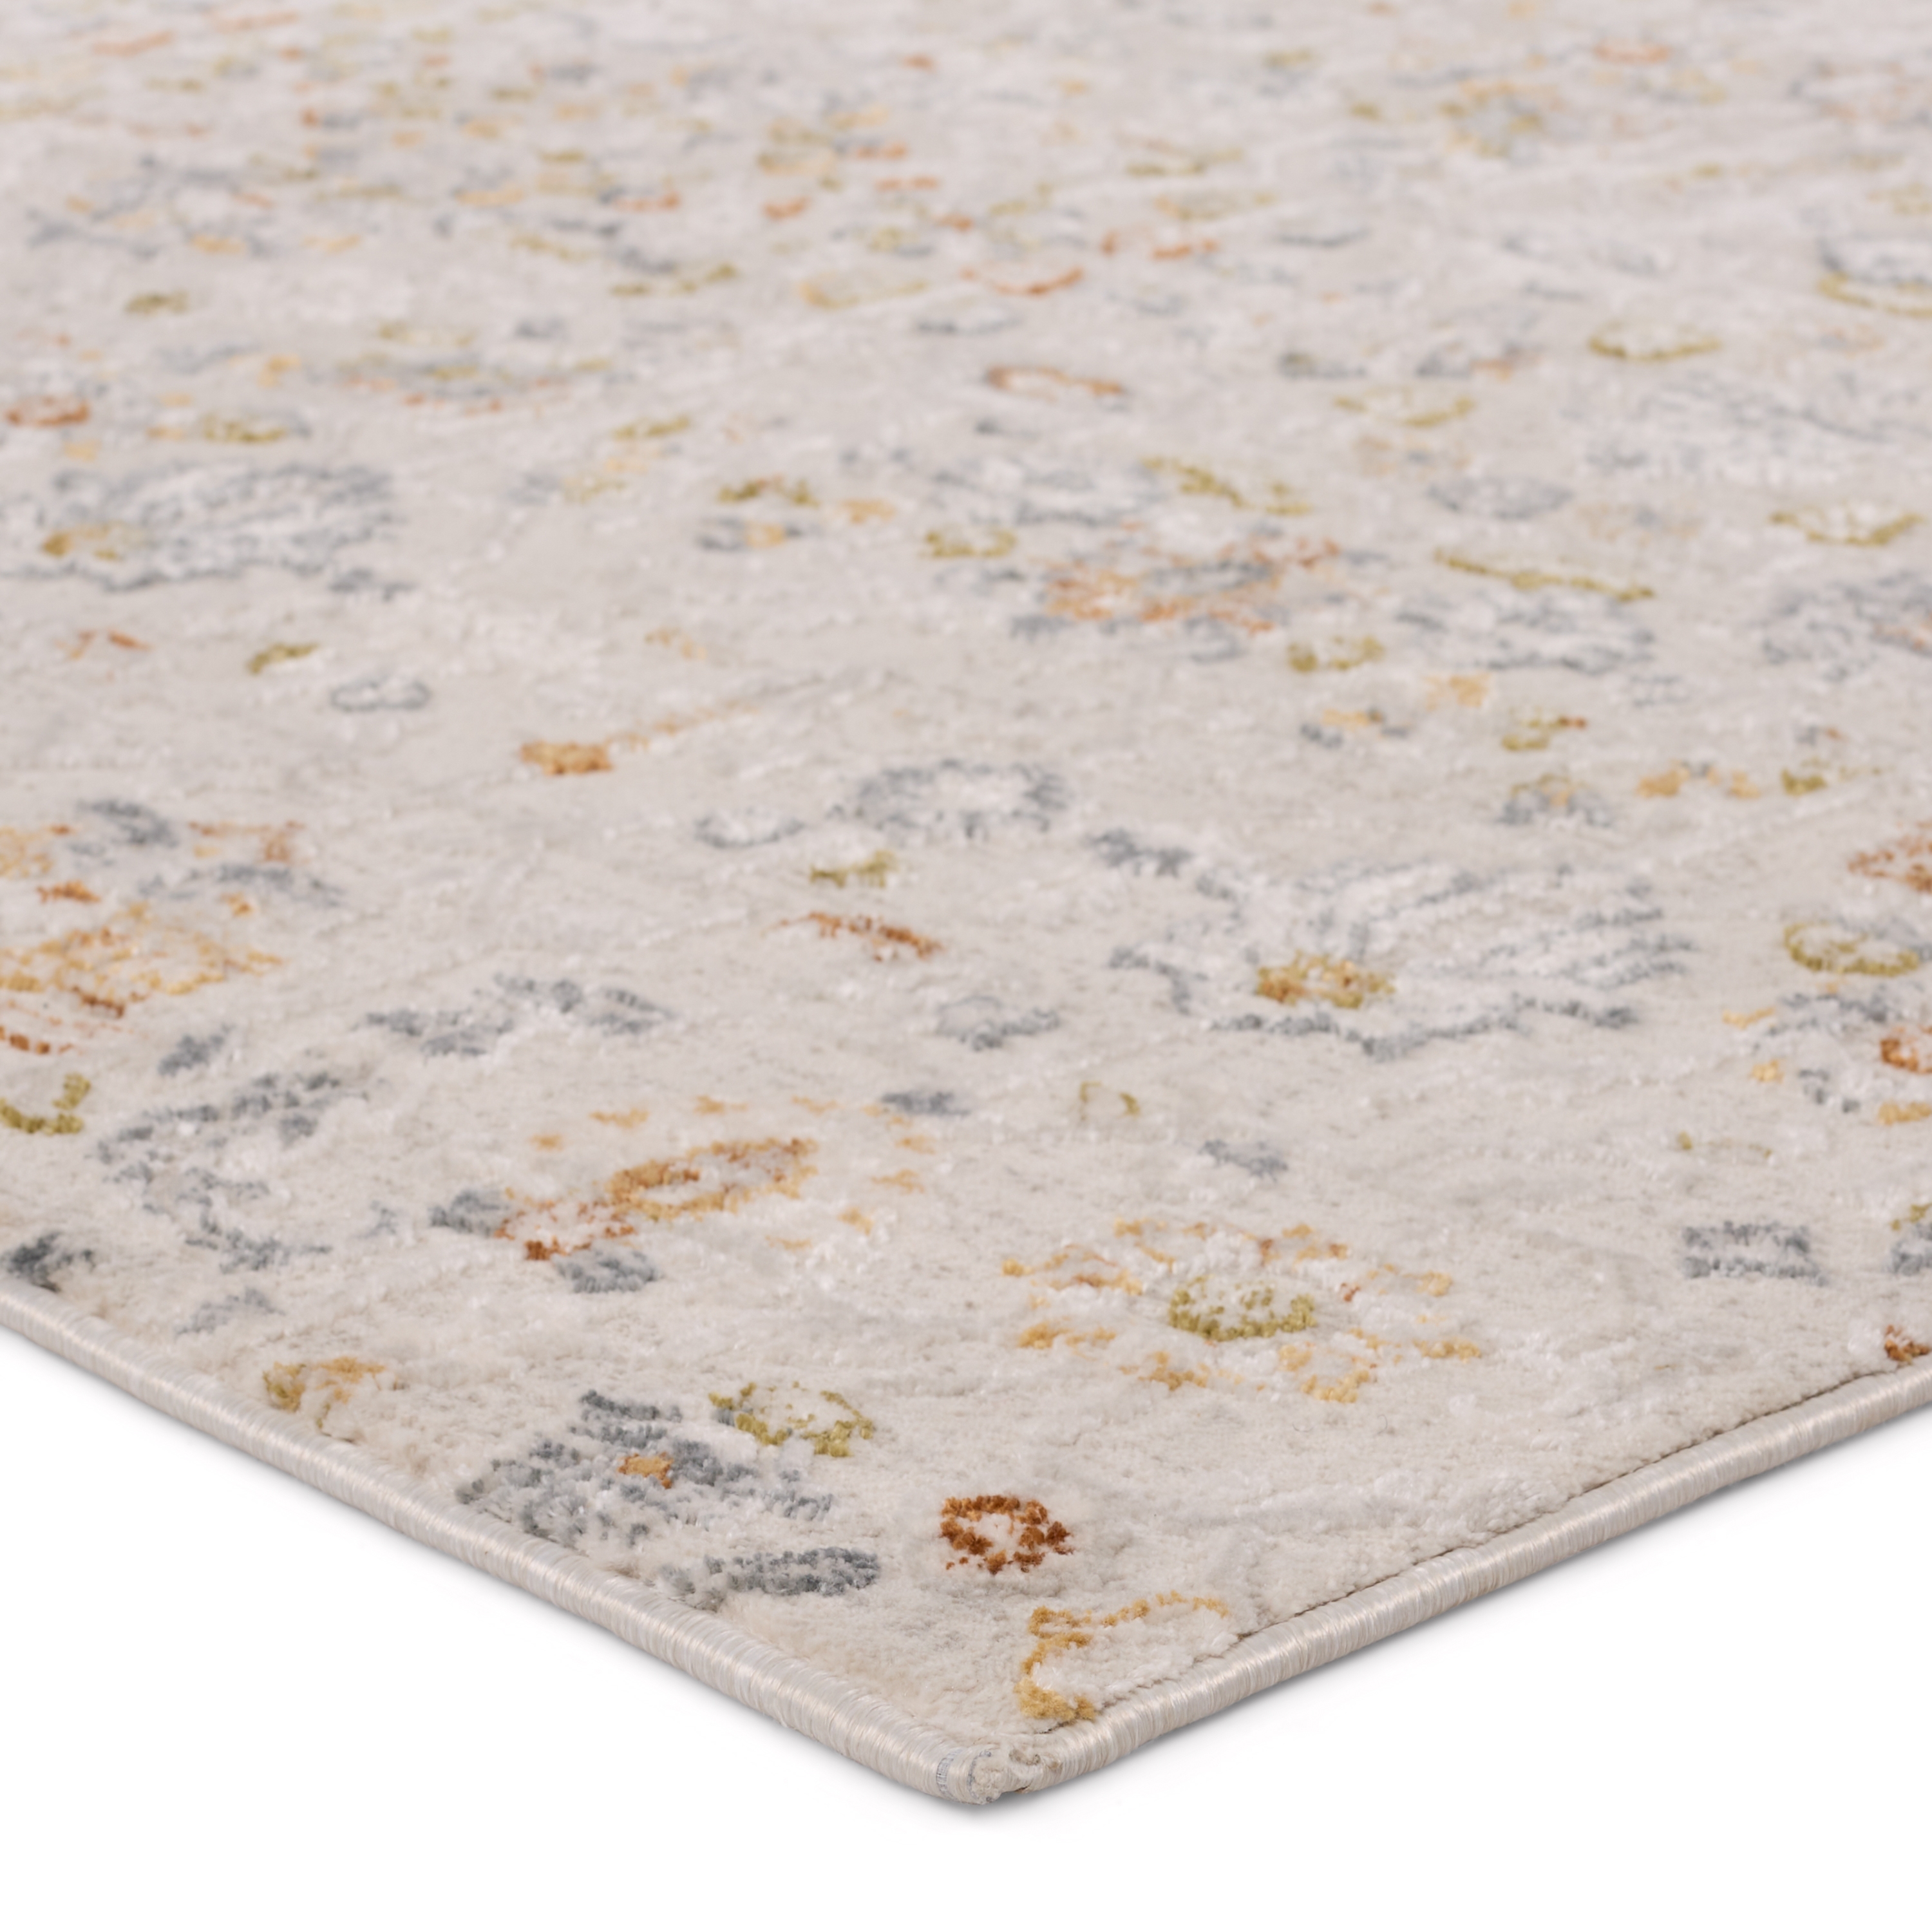 Waverly Floral White/ Light Gray Area Rug (11'10"X14') - Image 1